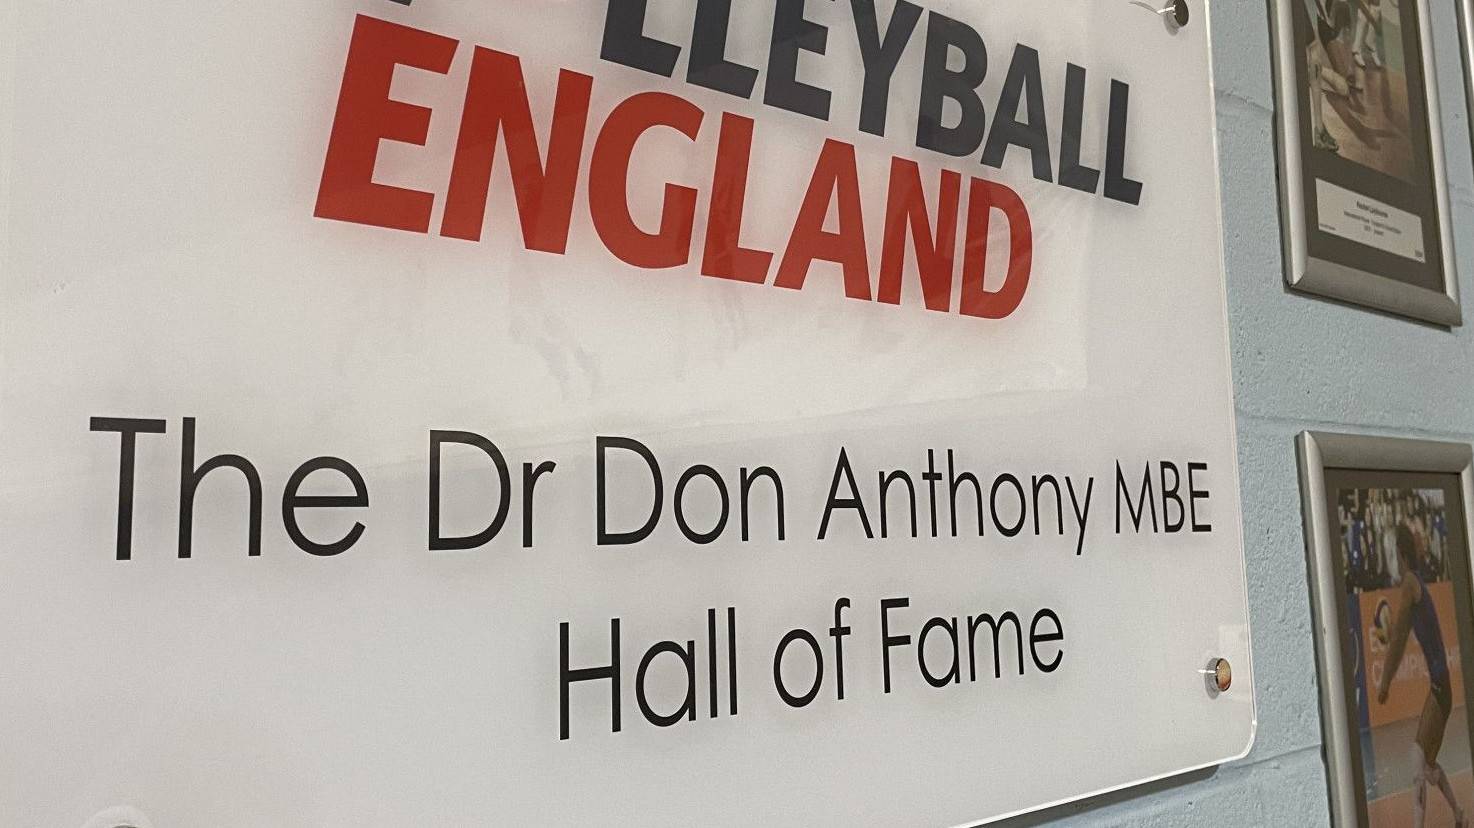 Five new Hall of Fame inductees announced